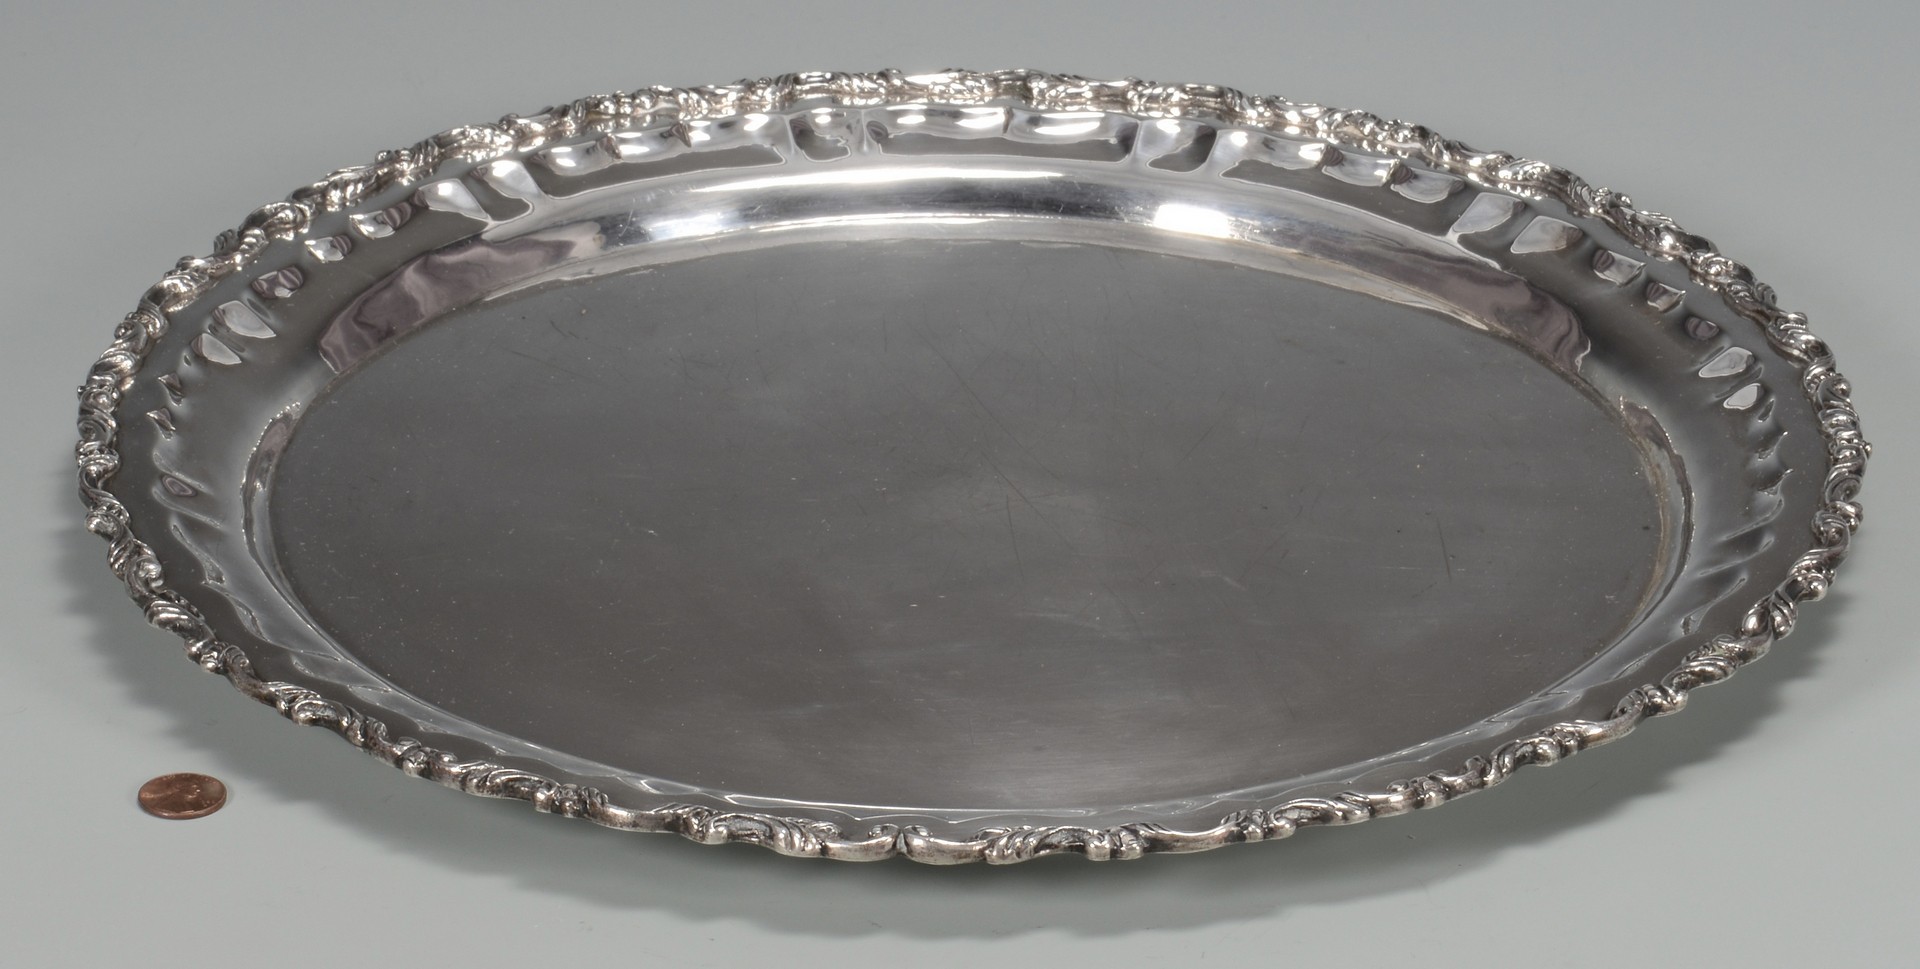 Lot 689: Mexican Sterling Silver Server, Sanborns